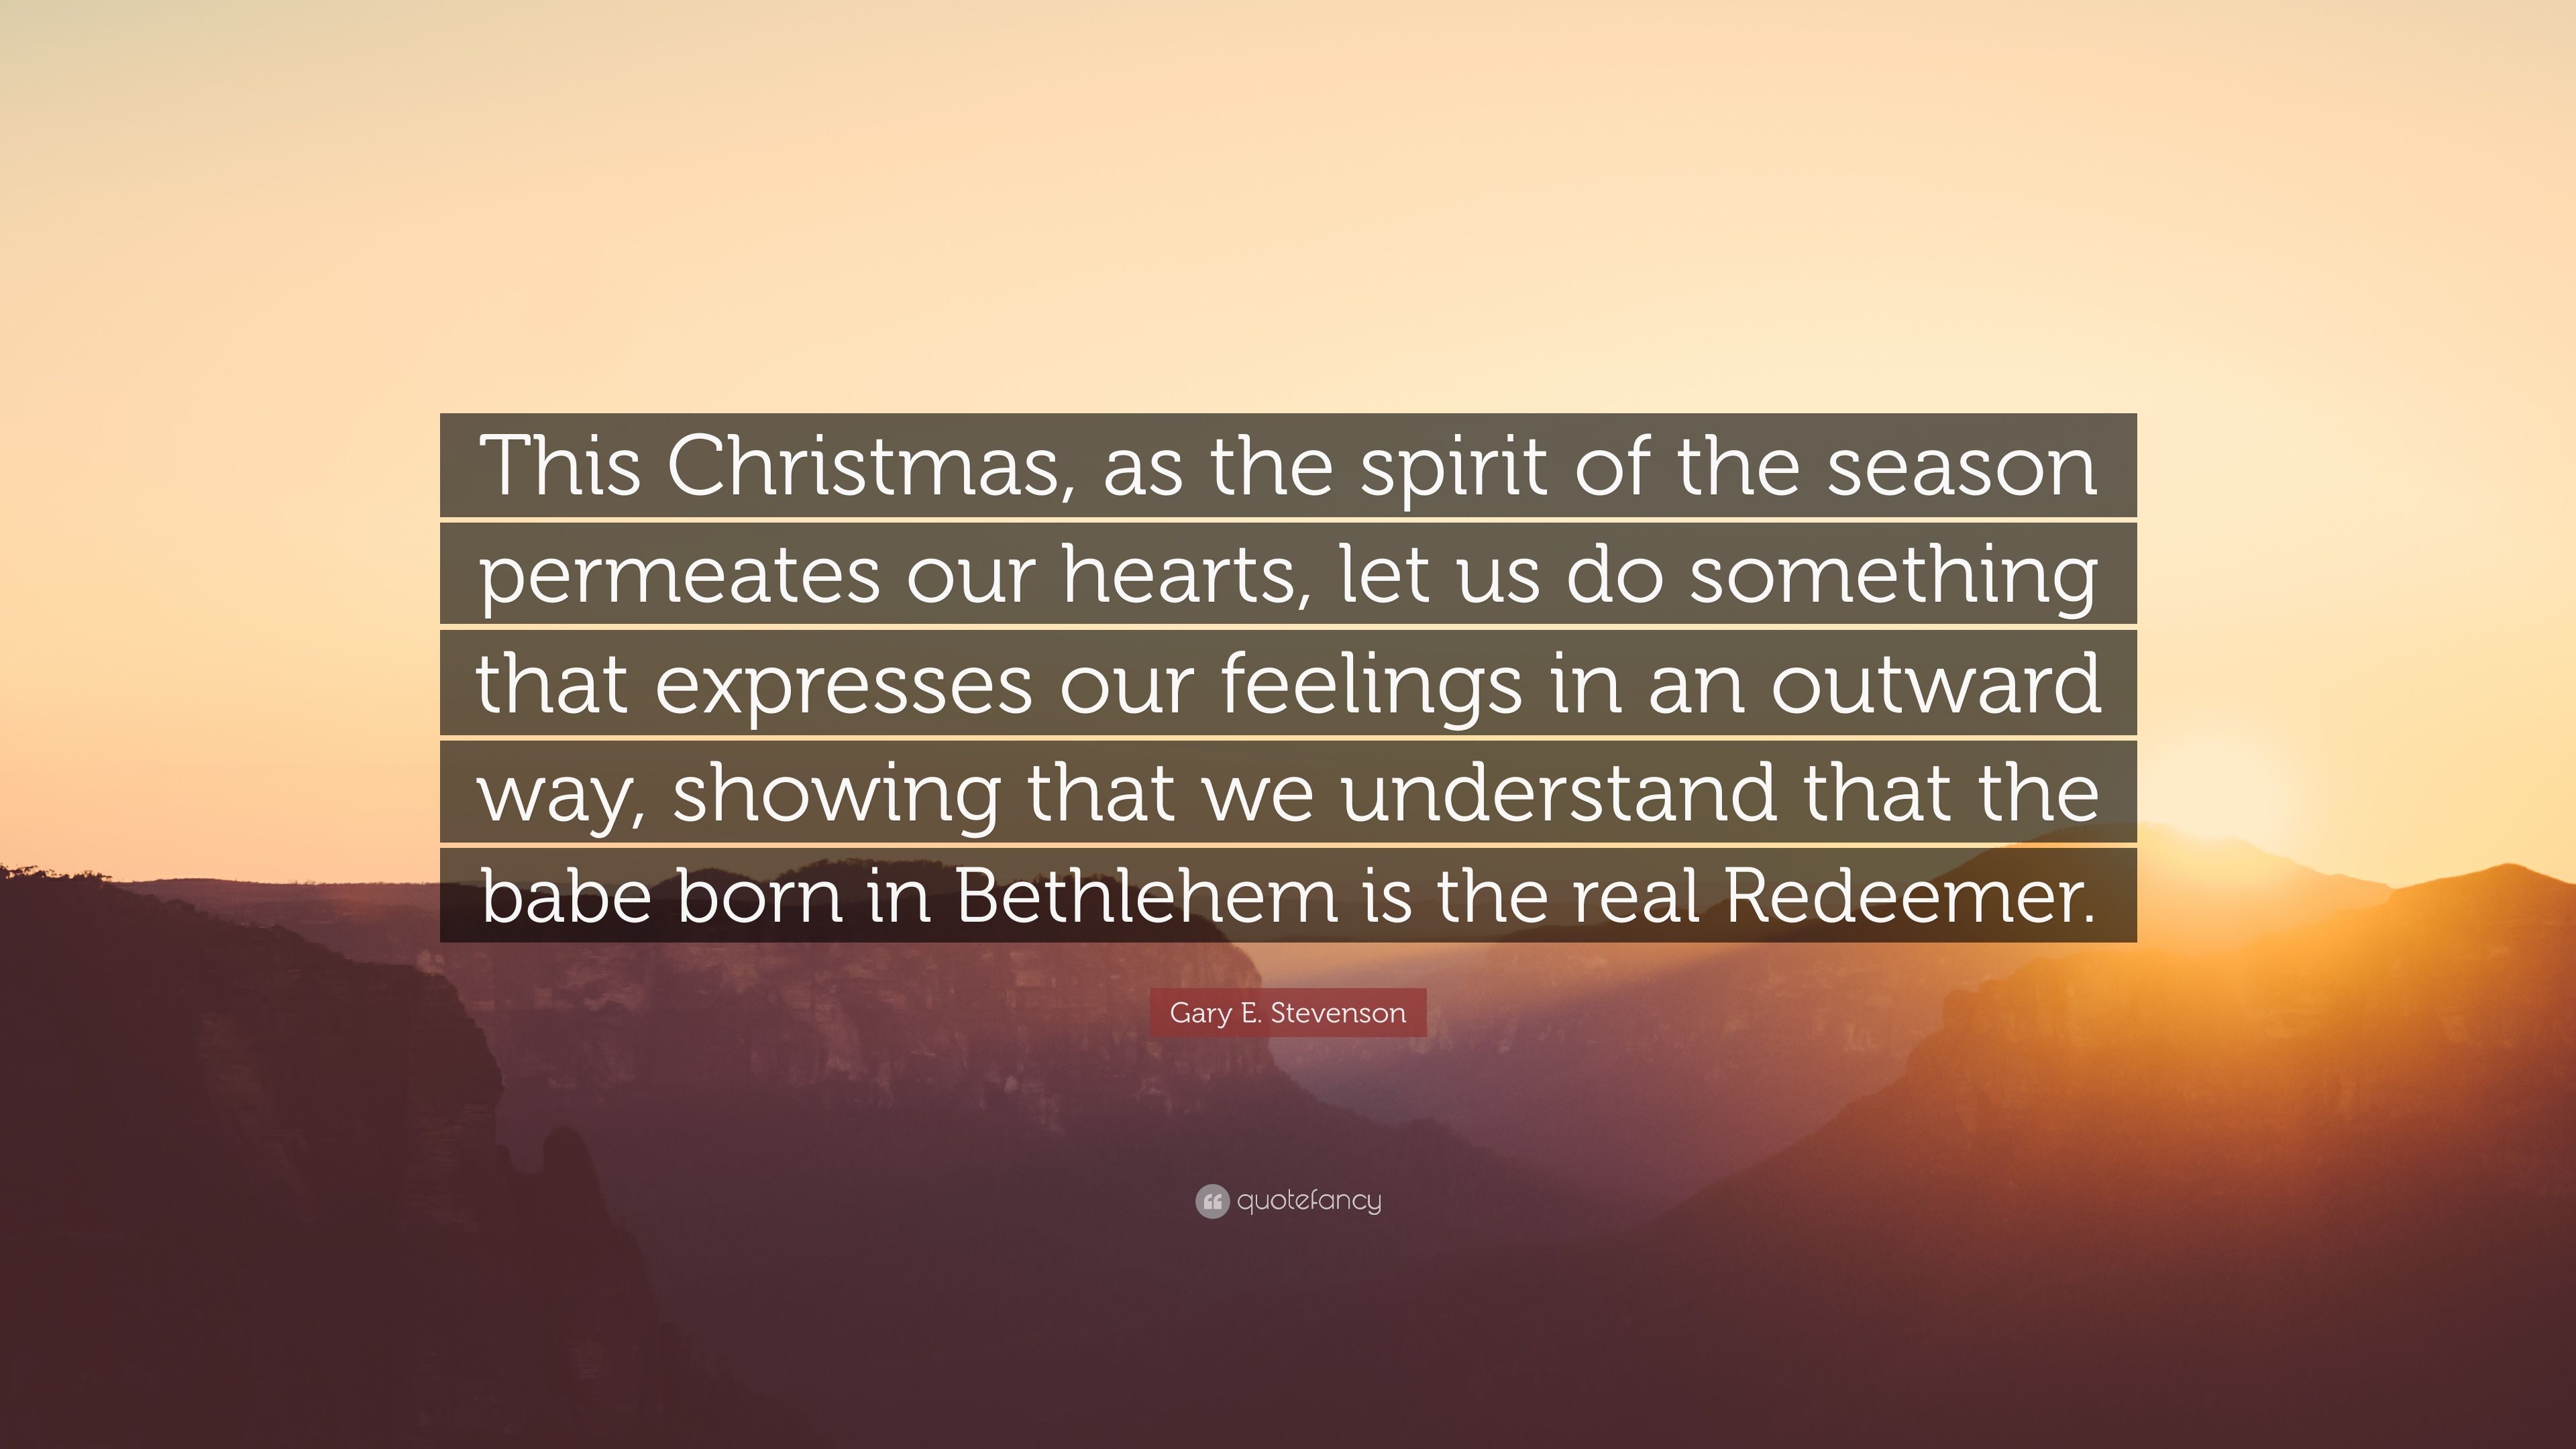 Gary E. Stevenson Quote: “This Christmas, as the spirit of the season permeates our hearts, let us do something that expresses our feelings in an .” (7 wallpaper)